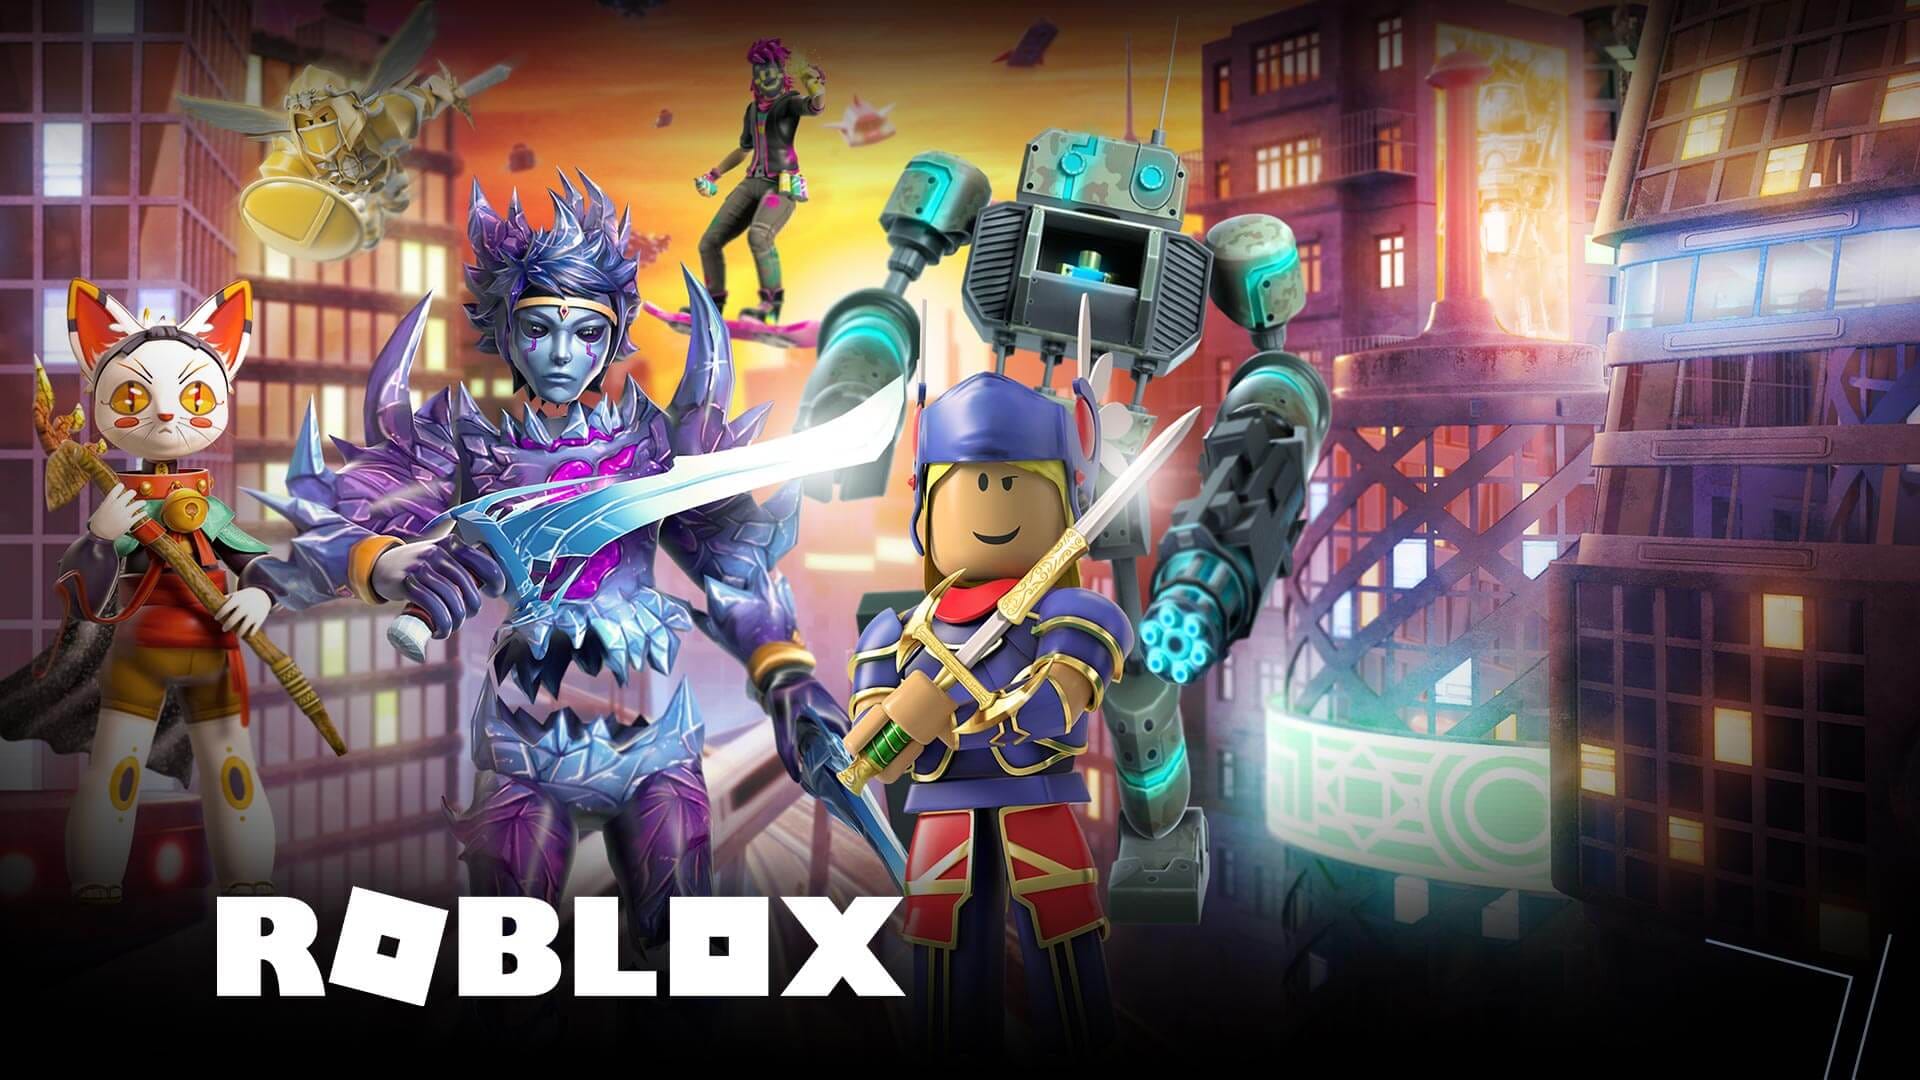 Some characters intended to show off the Roblox 